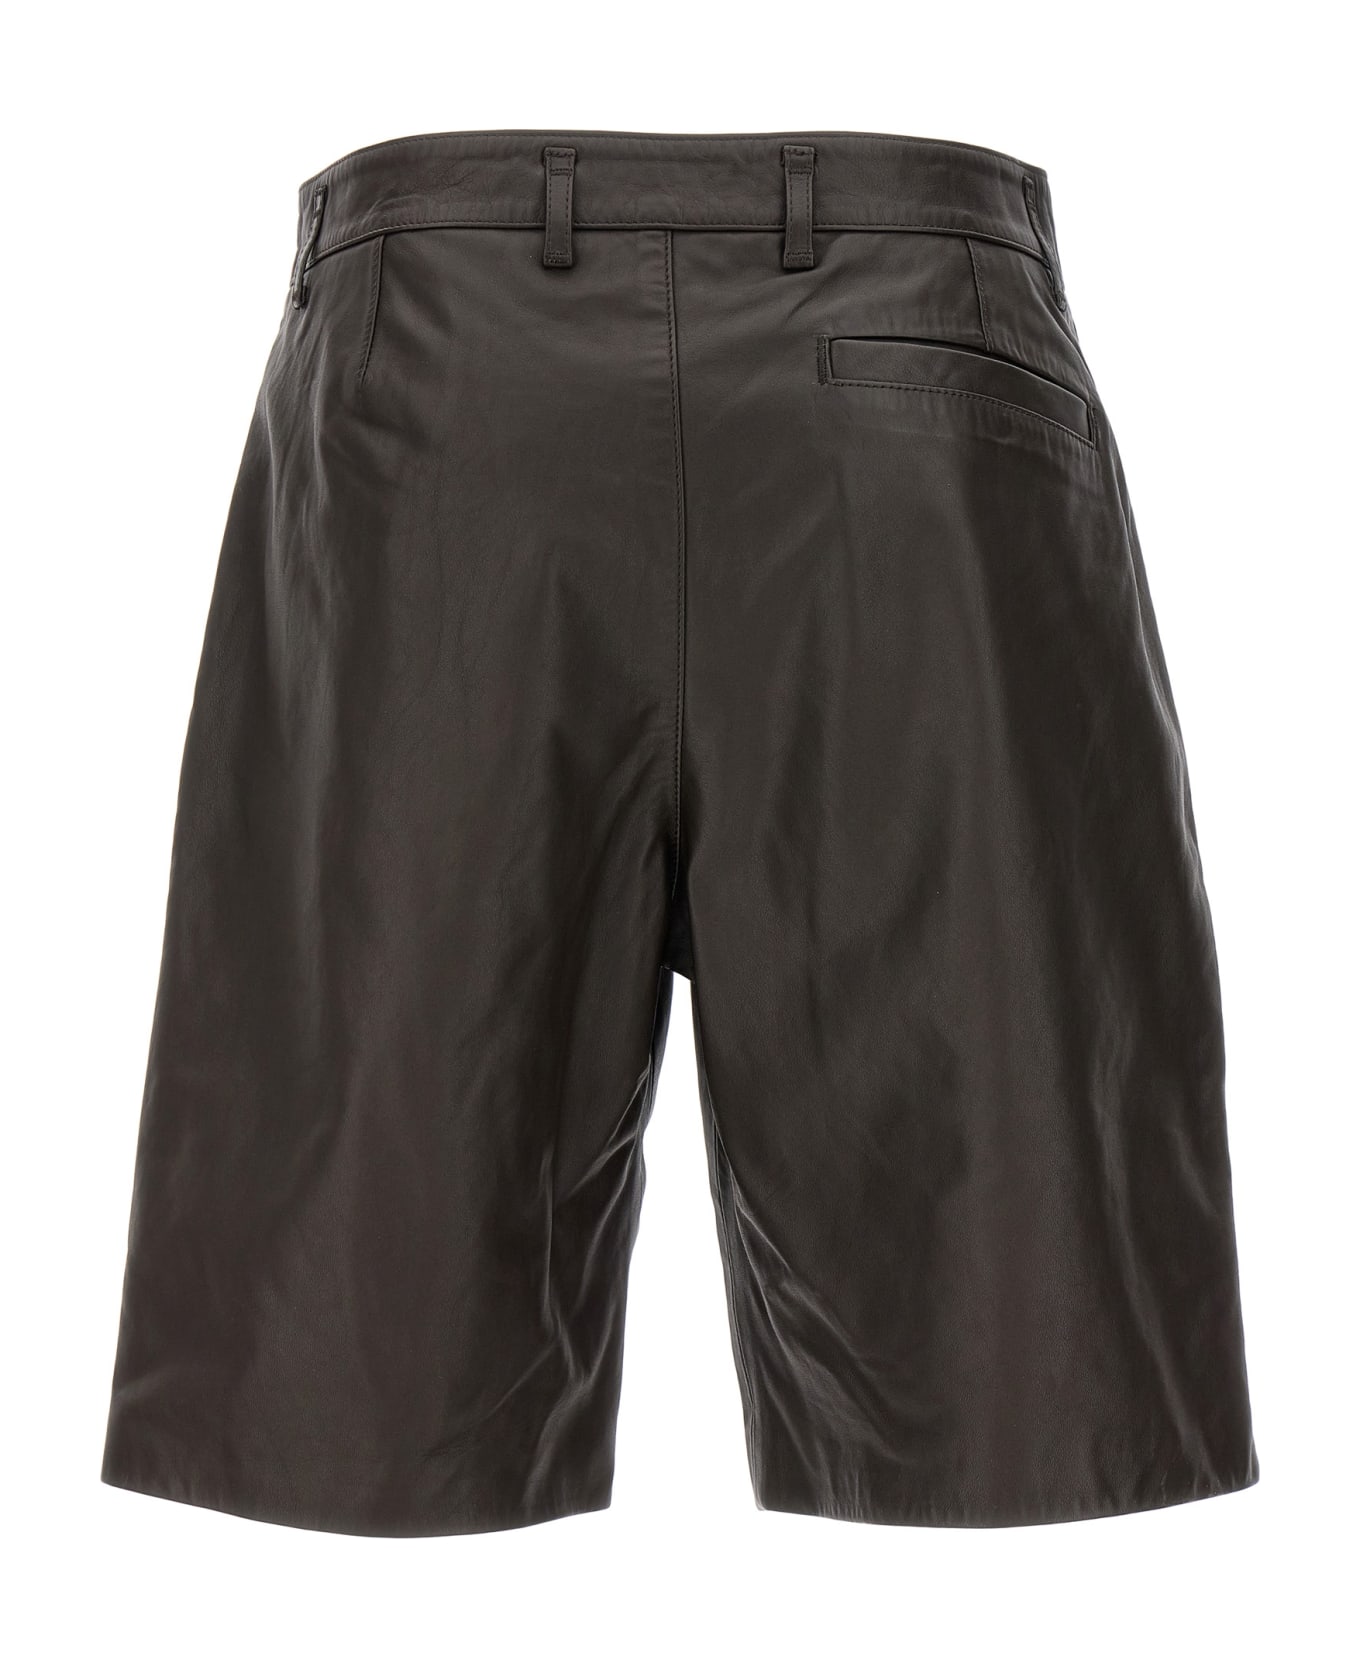 Lemaire Leather Bermuda Shorts - BROWN ショートパンツ